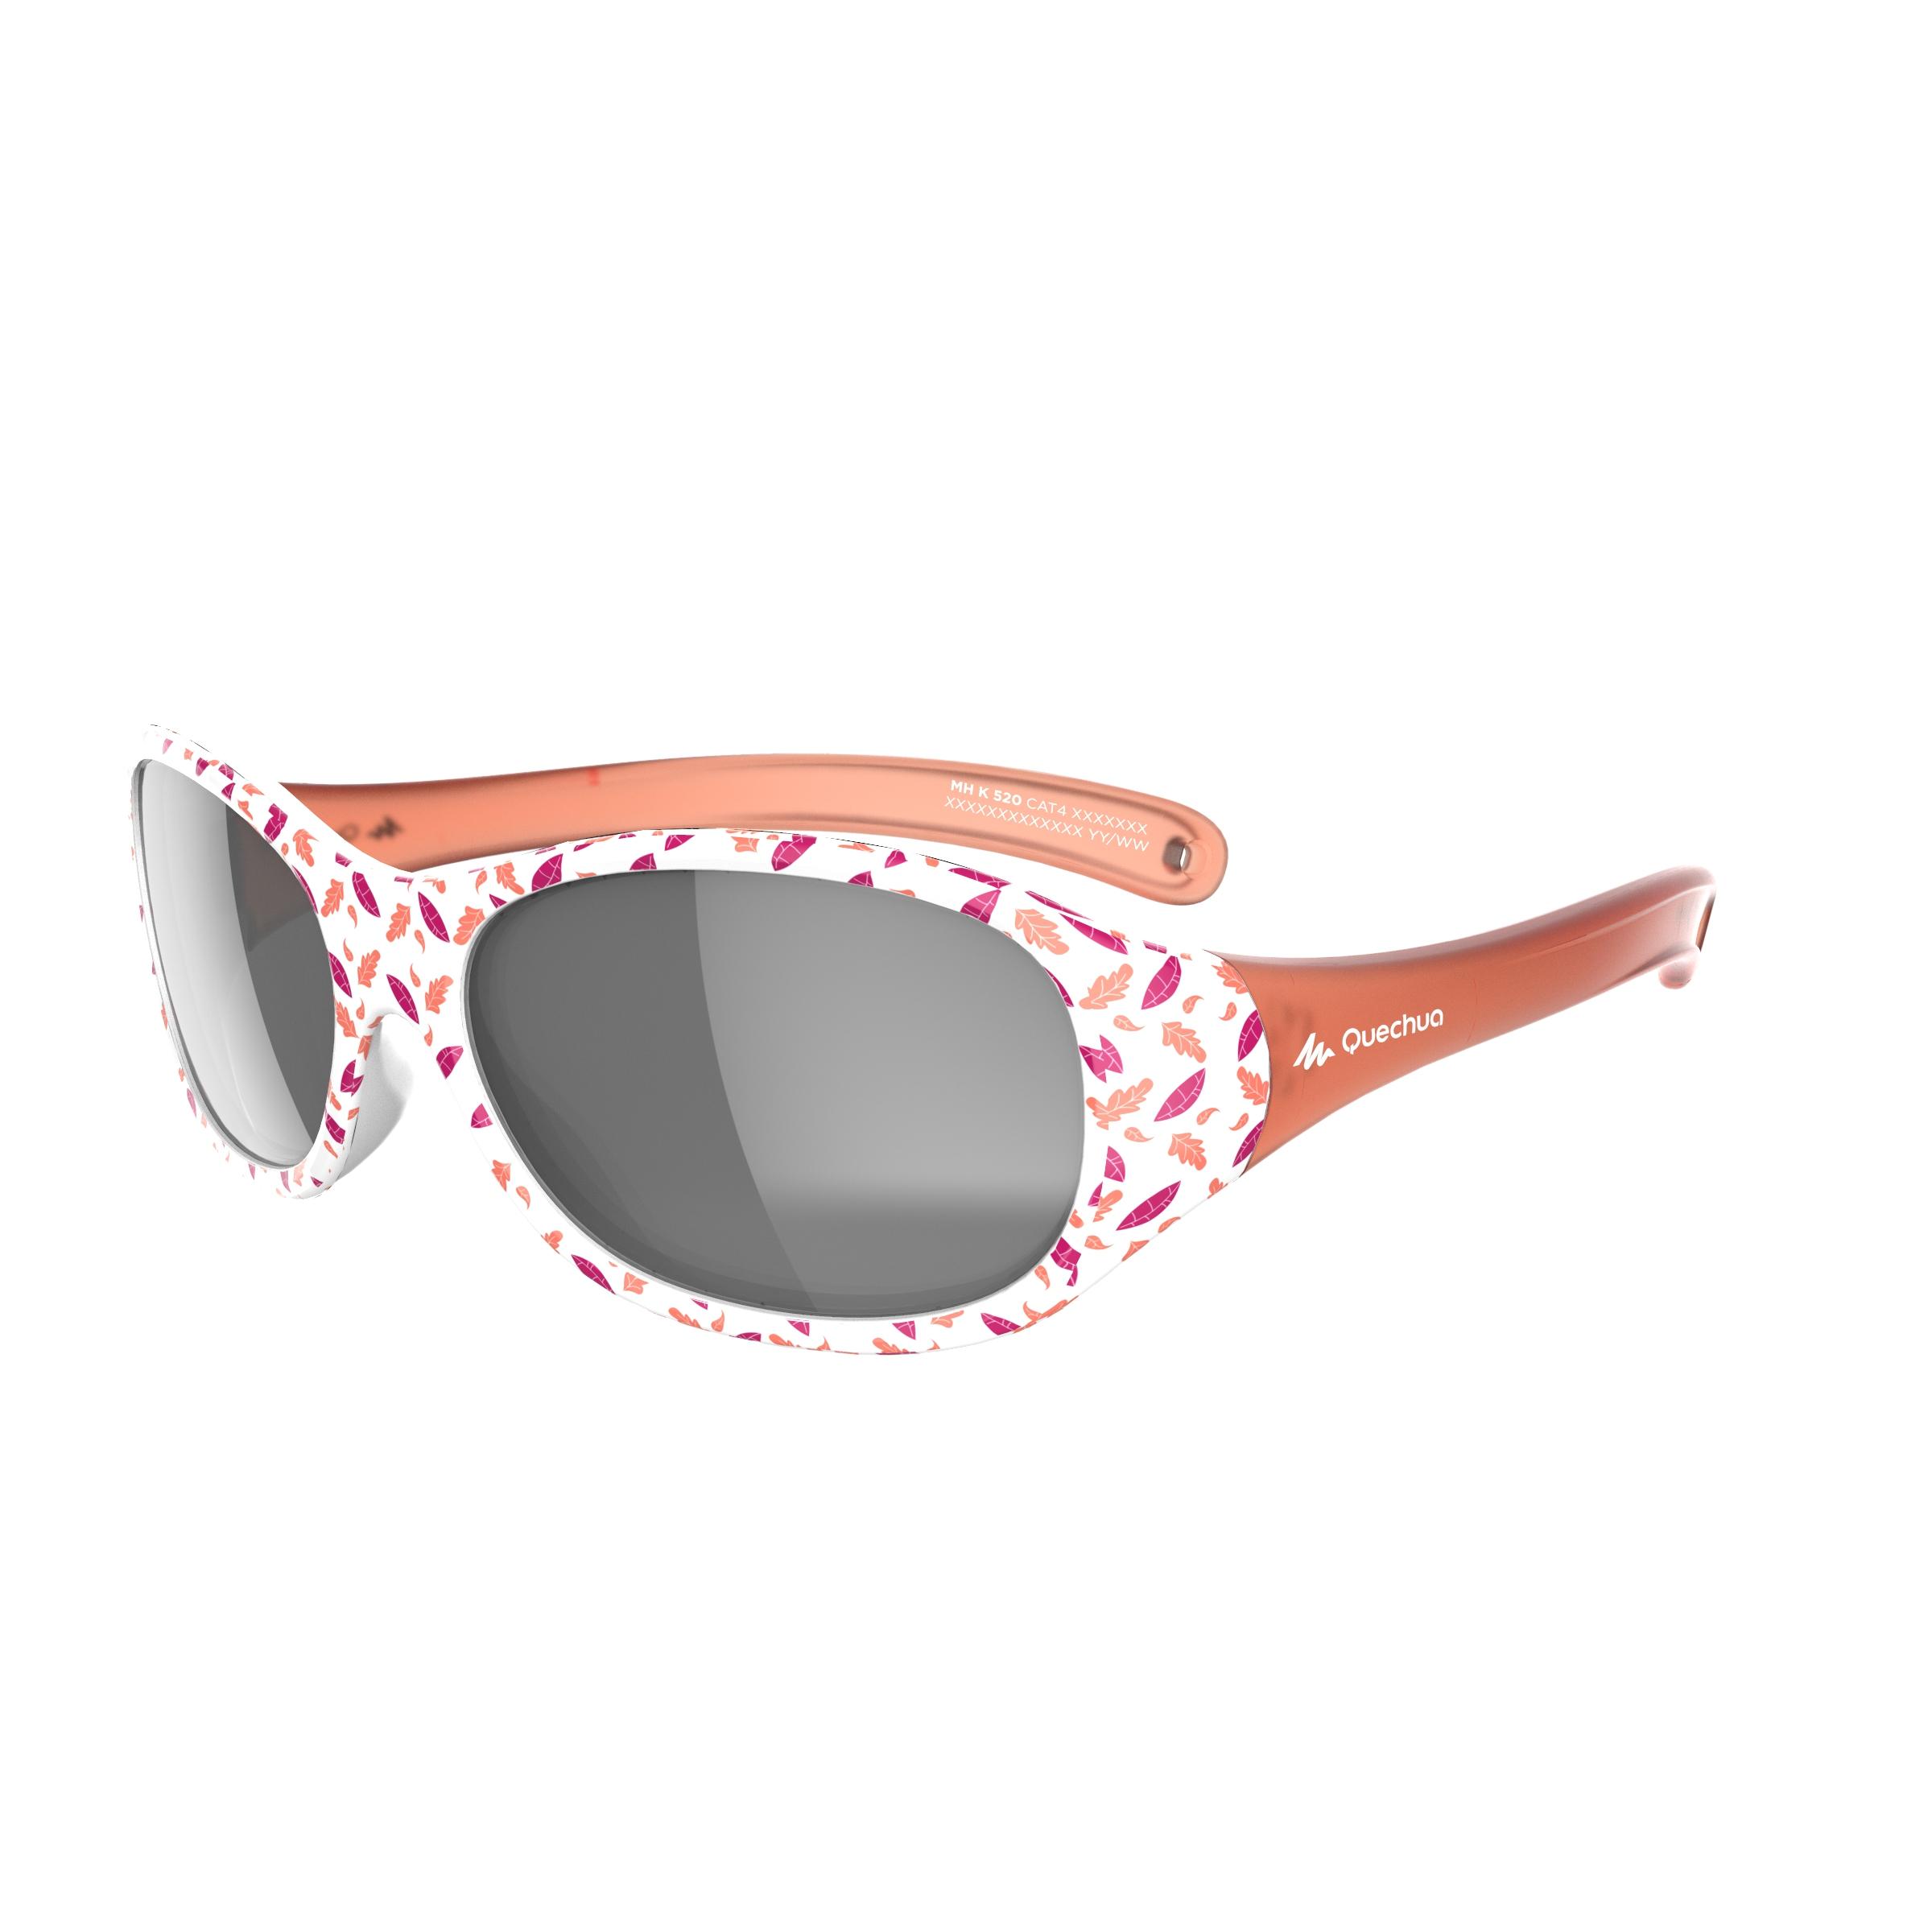 QUECHUA MH K 120 Children category 4 Hiking Sunglasses Ages 2-4 - Coral